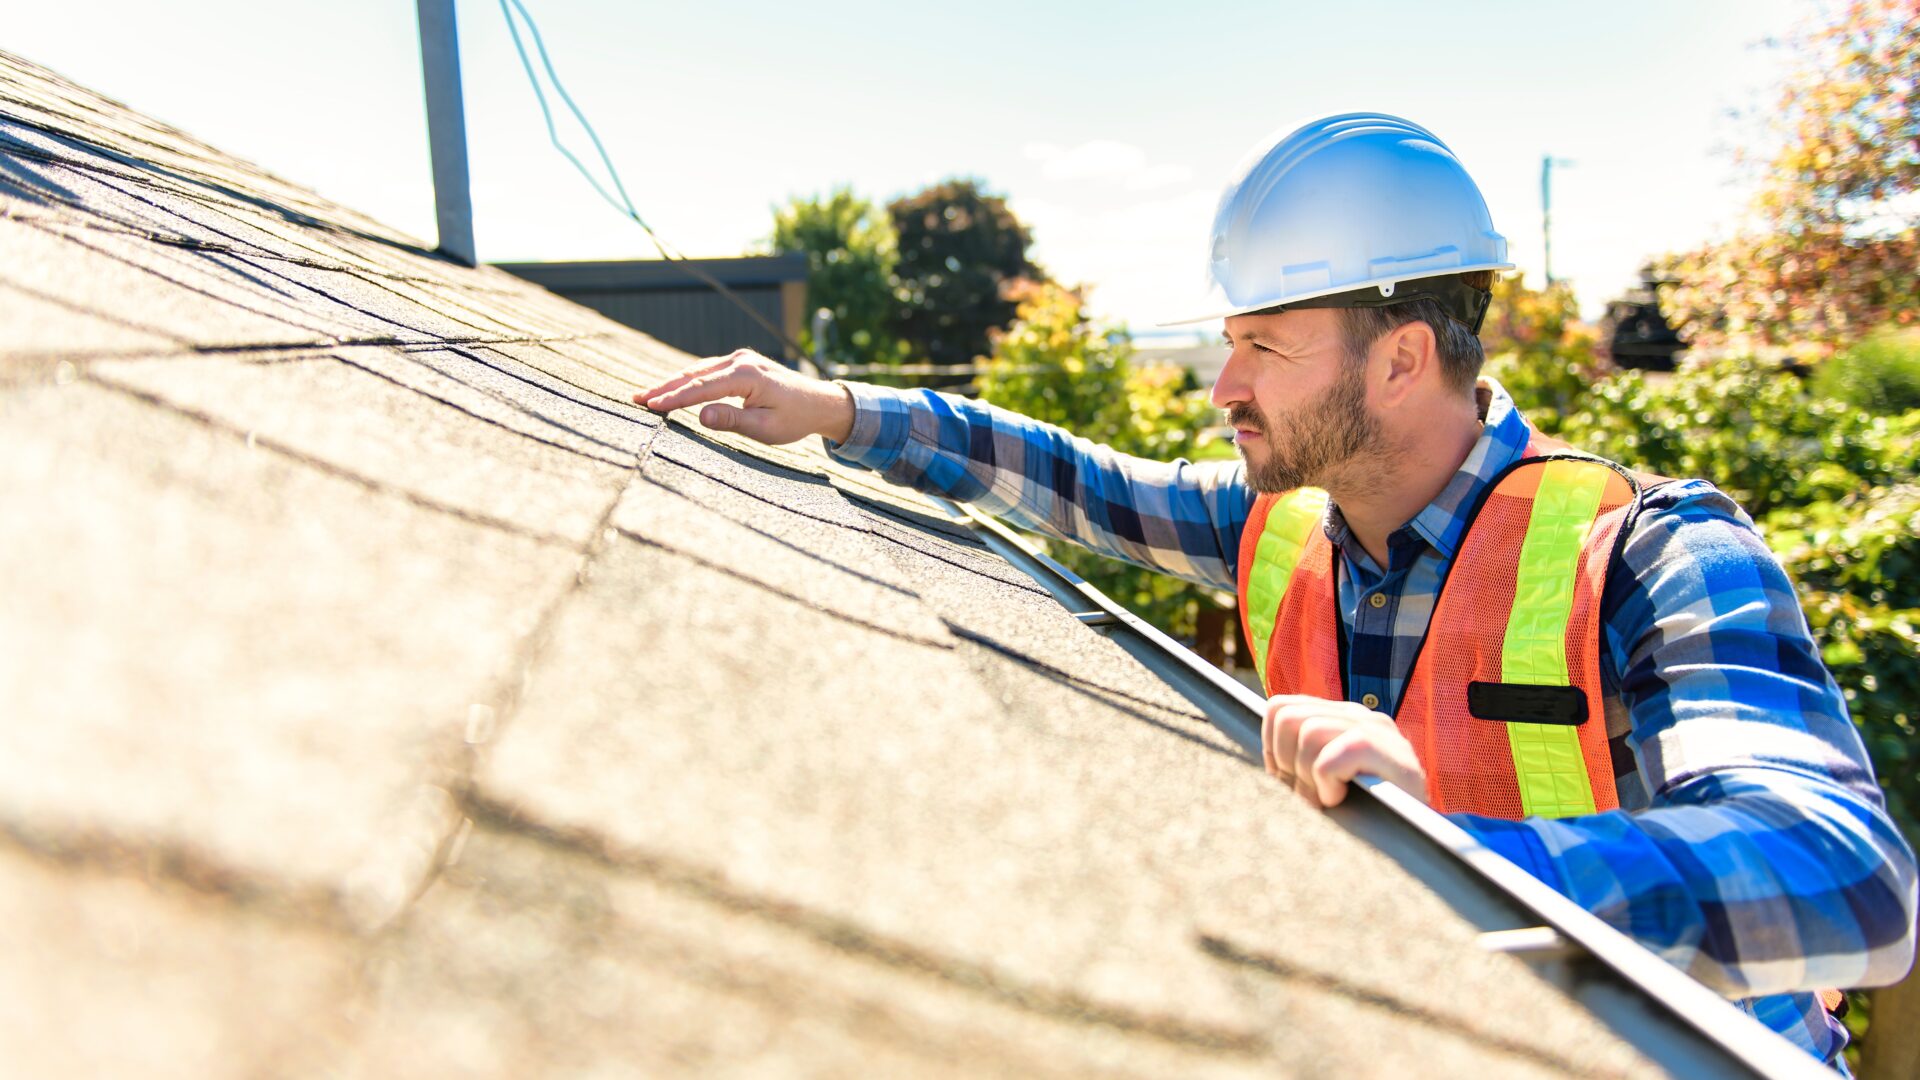 Roofer inspecting a shingle roof during maintenance